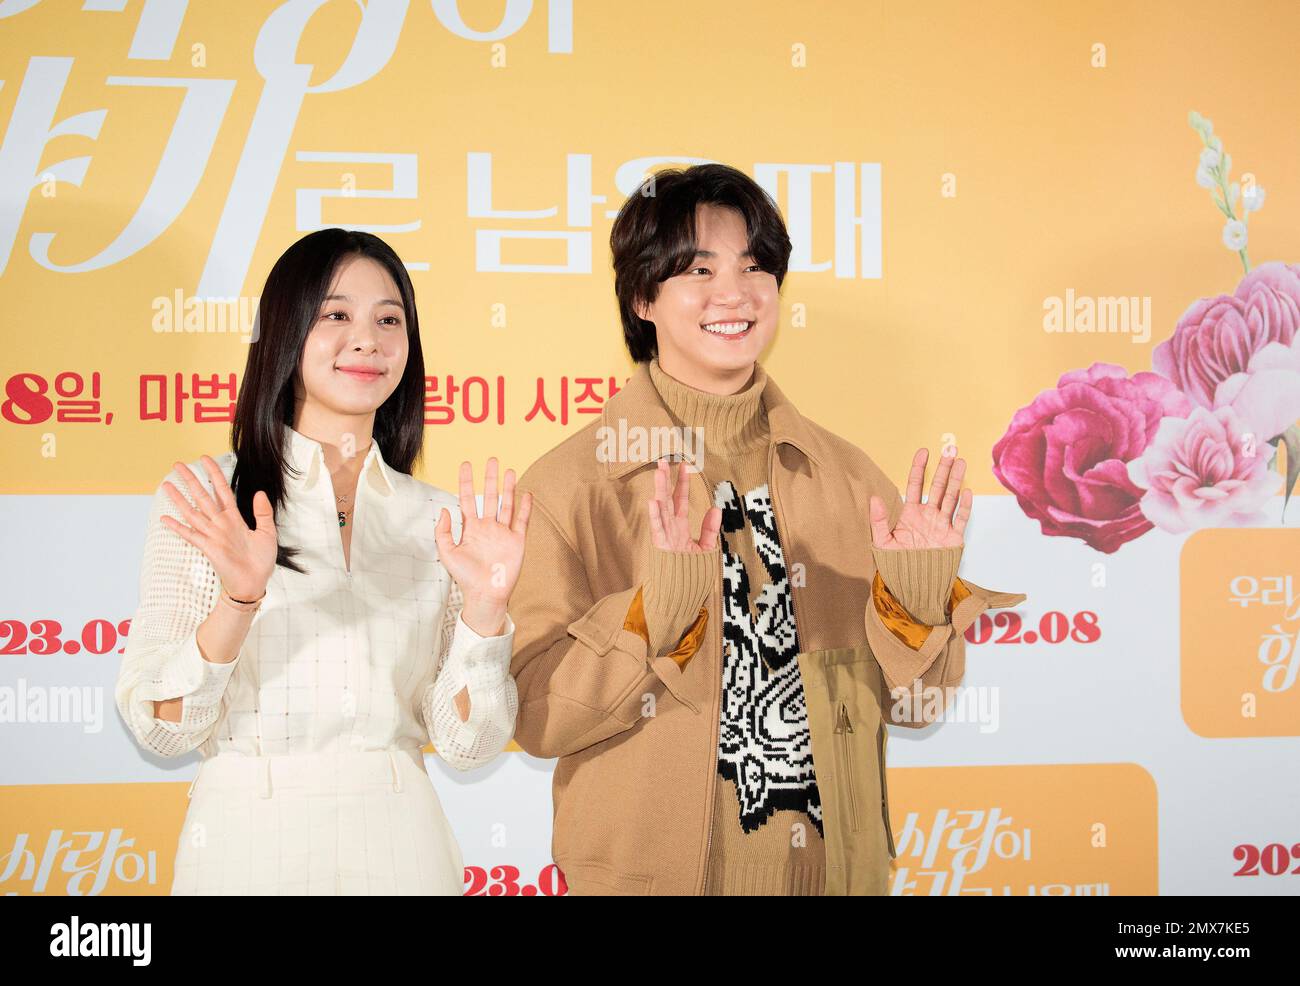 Seoul, South Korea. Feb 2, 2023 : Yoon Shi-Yoon and Seol In-Ah, Feb 2, 2023  : South Korean actor Yoon Shi-Yoon (R) and actress Seol In-Ah pose at a  press conference after